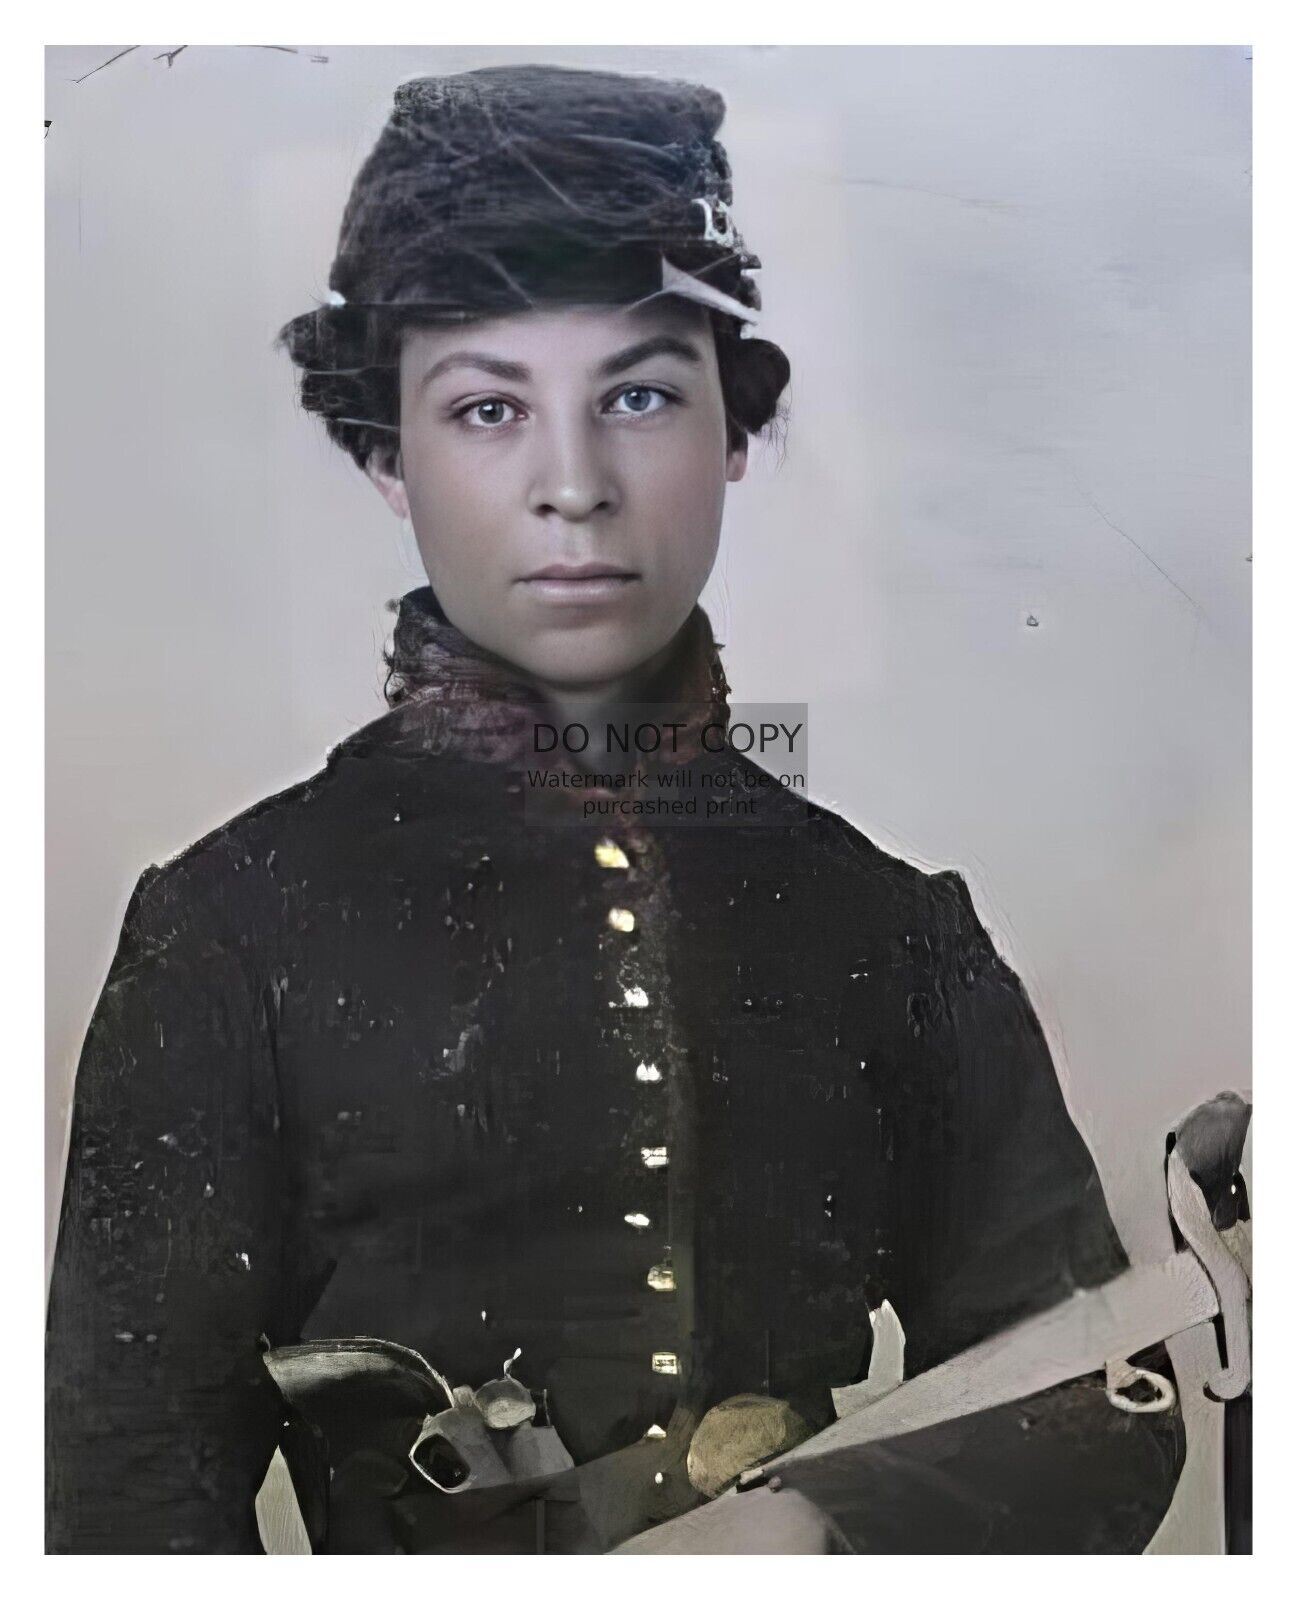 CATHAY WILLIAMS ONLY FEMALE BUFFALO SOLDIER UNION CIVIL WAR 8X10 COLORIZED PHOTO